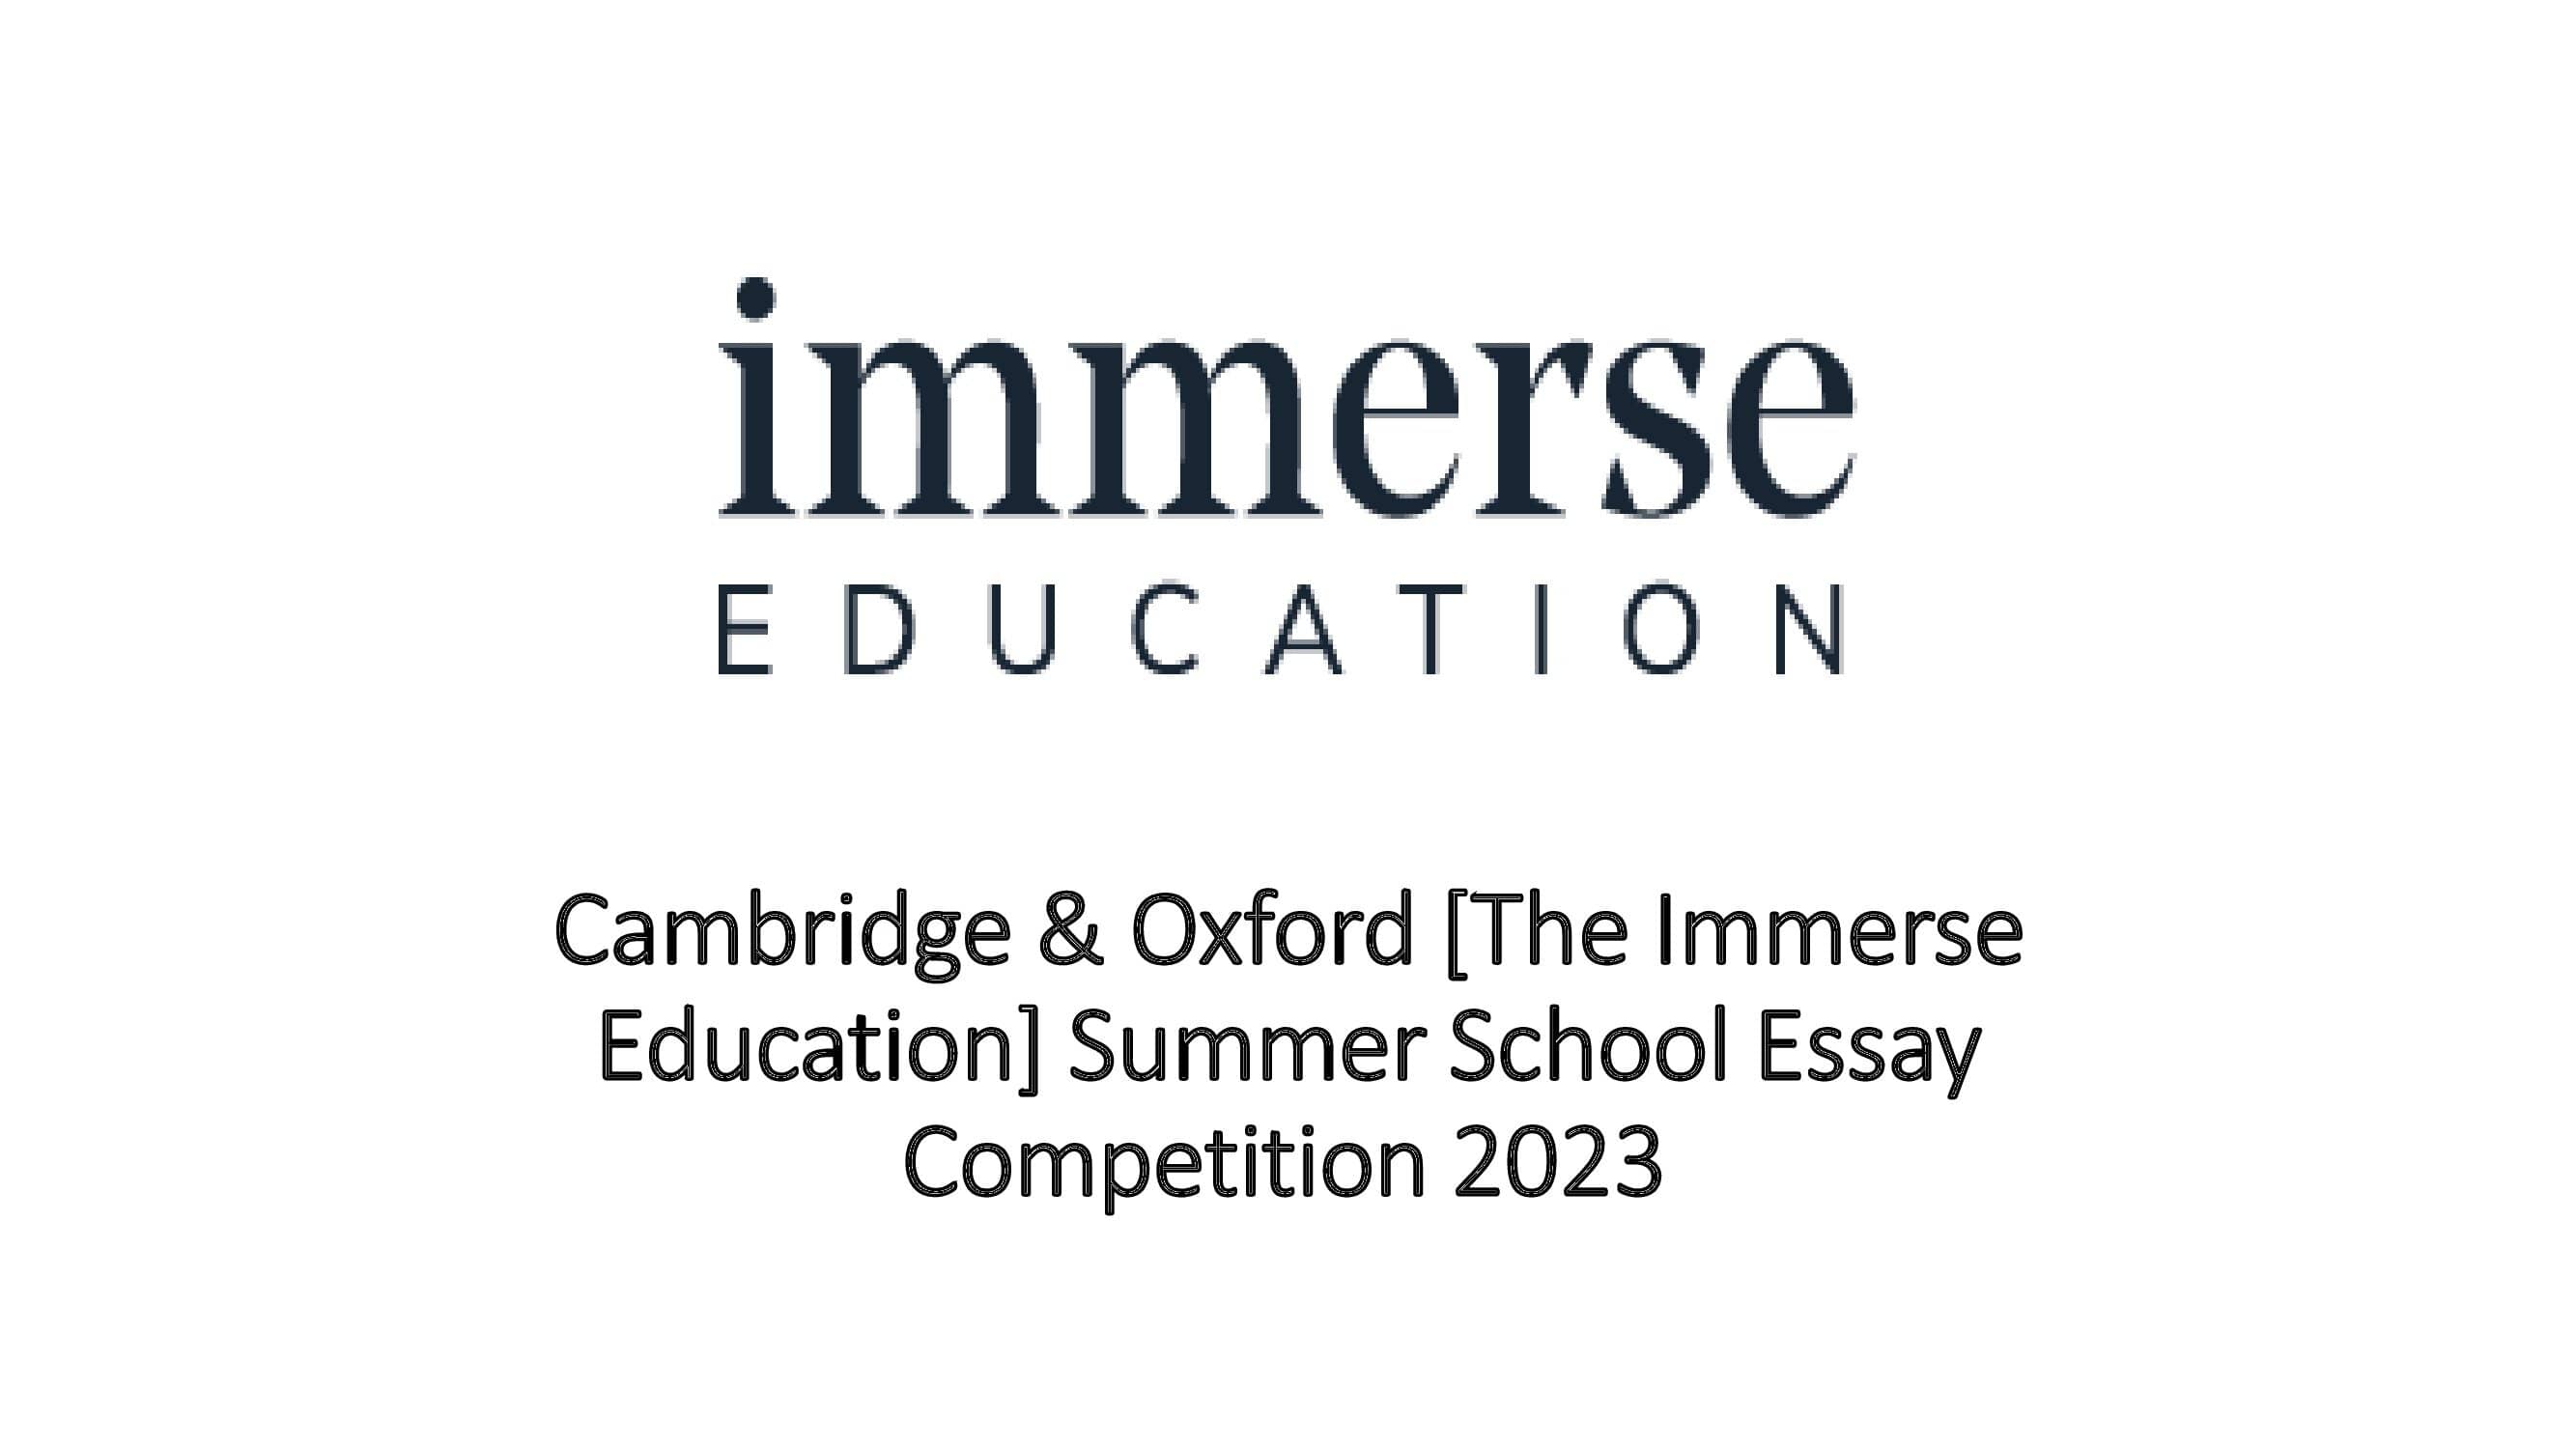 Cambridge & Oxford [The Immerse Education] Summer School Essay Competition 2023